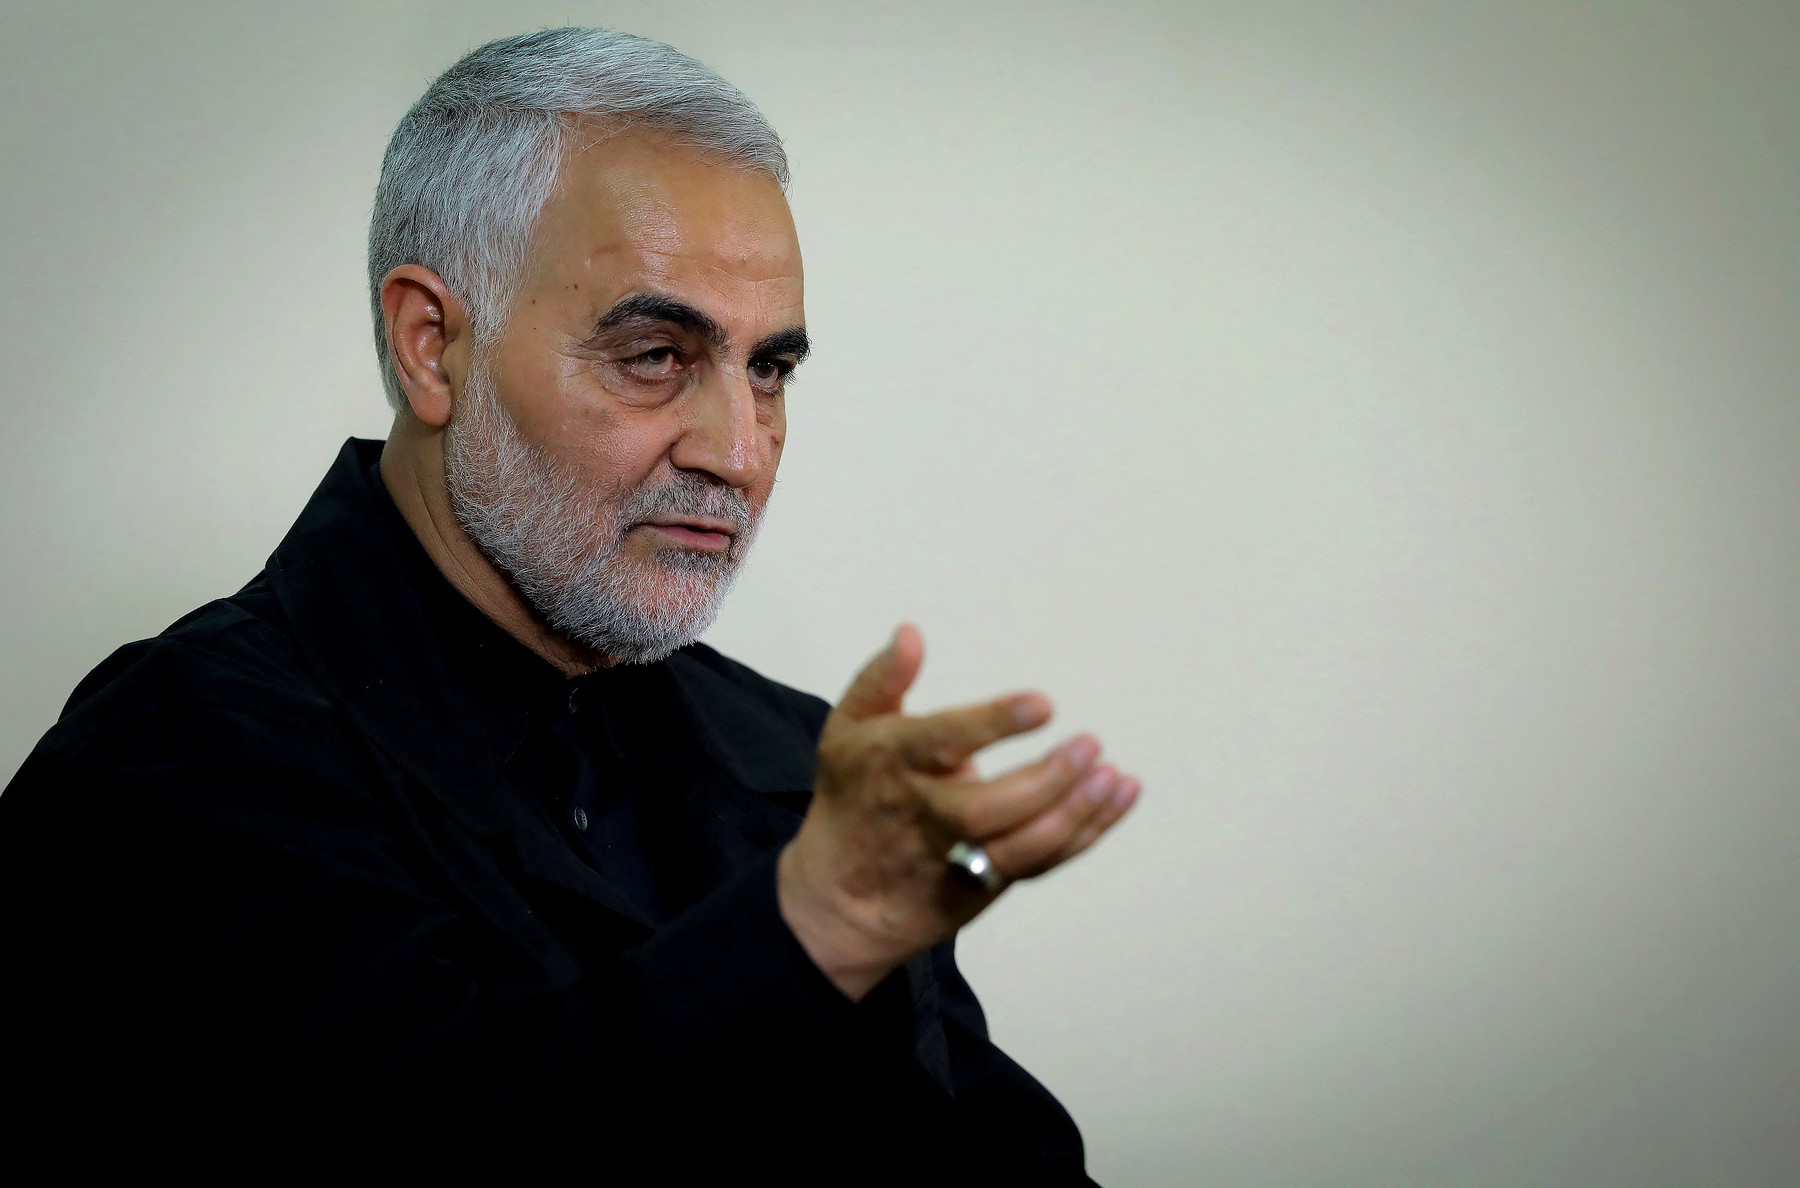 Qassem Soleimani, the leader of Iran's elite Quds Force, was killed late Thursday in a U.S. airstrike that targeted a convoy near the airport in Baghdad. FILE - Major General Haj Qassem Soleimani, the commander of the Quds Force, an elite unit of Iranâs Islamic Revolutionary Guards Corps (IRGC) during an interview by Ayatollah Ali Khamenei's Publications Office about the Lebanon War 34 day war between Hezbollah paramilitary forces and the Israel Defense Forces (IDF), the military conflict in Lebanon started on 12 July 2006, and continued until a United Nations brokered ceasefire went into effect in the morning on 14 August 2006, Tehran, Iran, on October 1, 2019., Image: 490738516, License: Rights-managed, Restrictions: , Model Release: no, Credit line: SalamPix/ABACA / Abaca Press / Profimedia